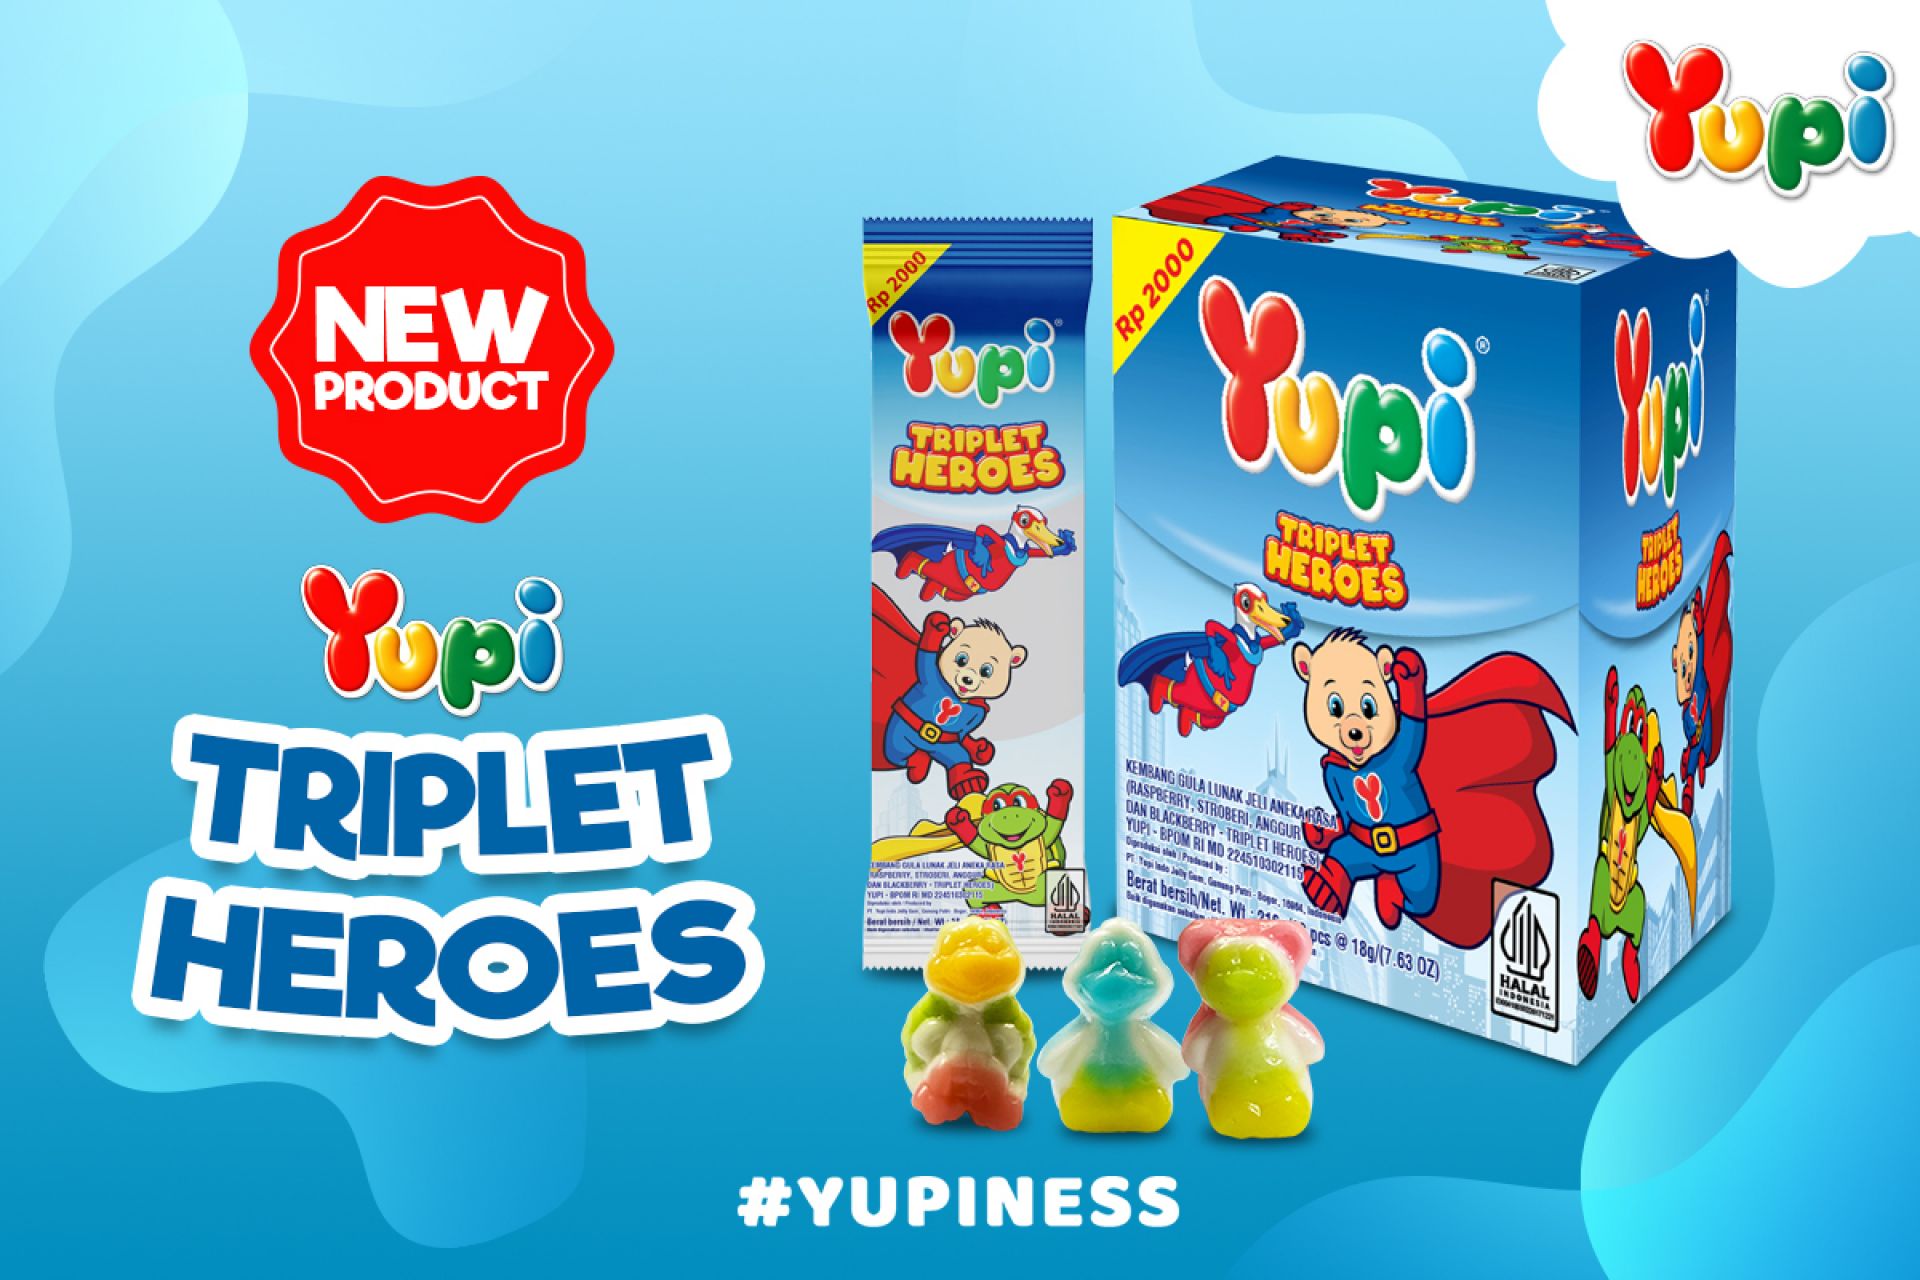 new product triplet heroes